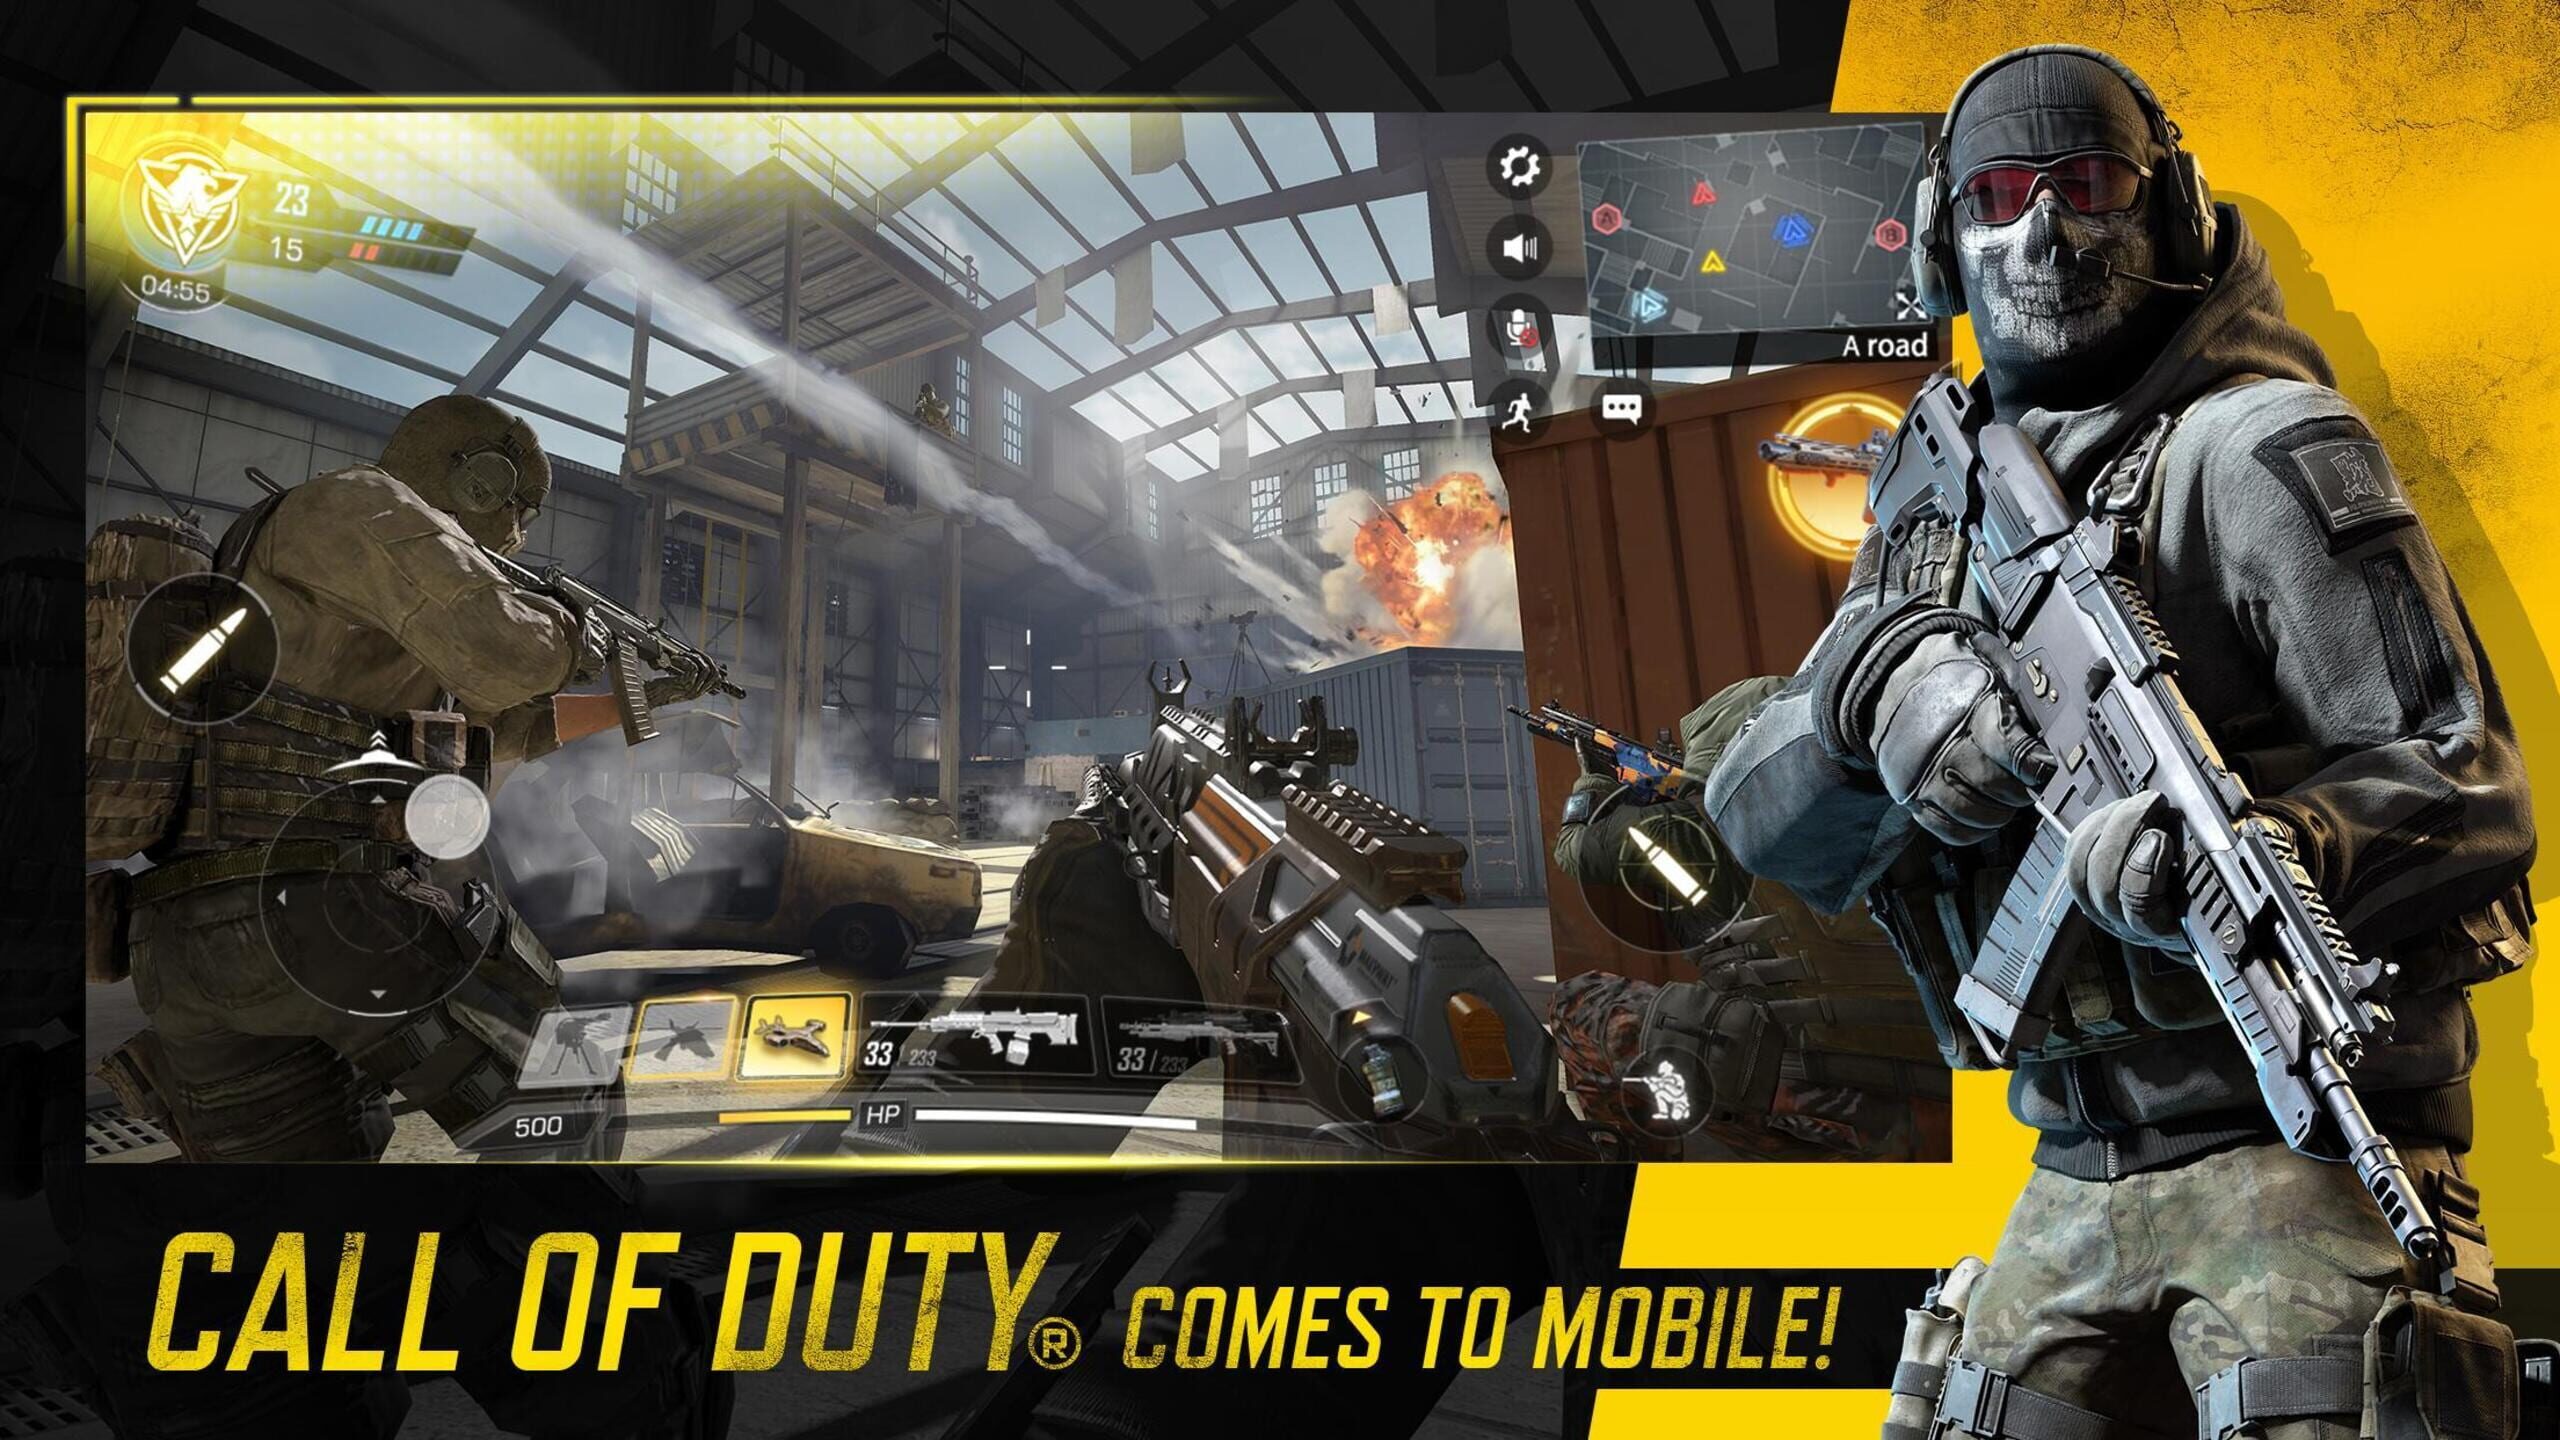 Кал оф дьюти плей маркет. Call of Duty mobile. Call of Duty mobile Gameplay. Call of Duty на андроид. Call of Duty mobile game Play.